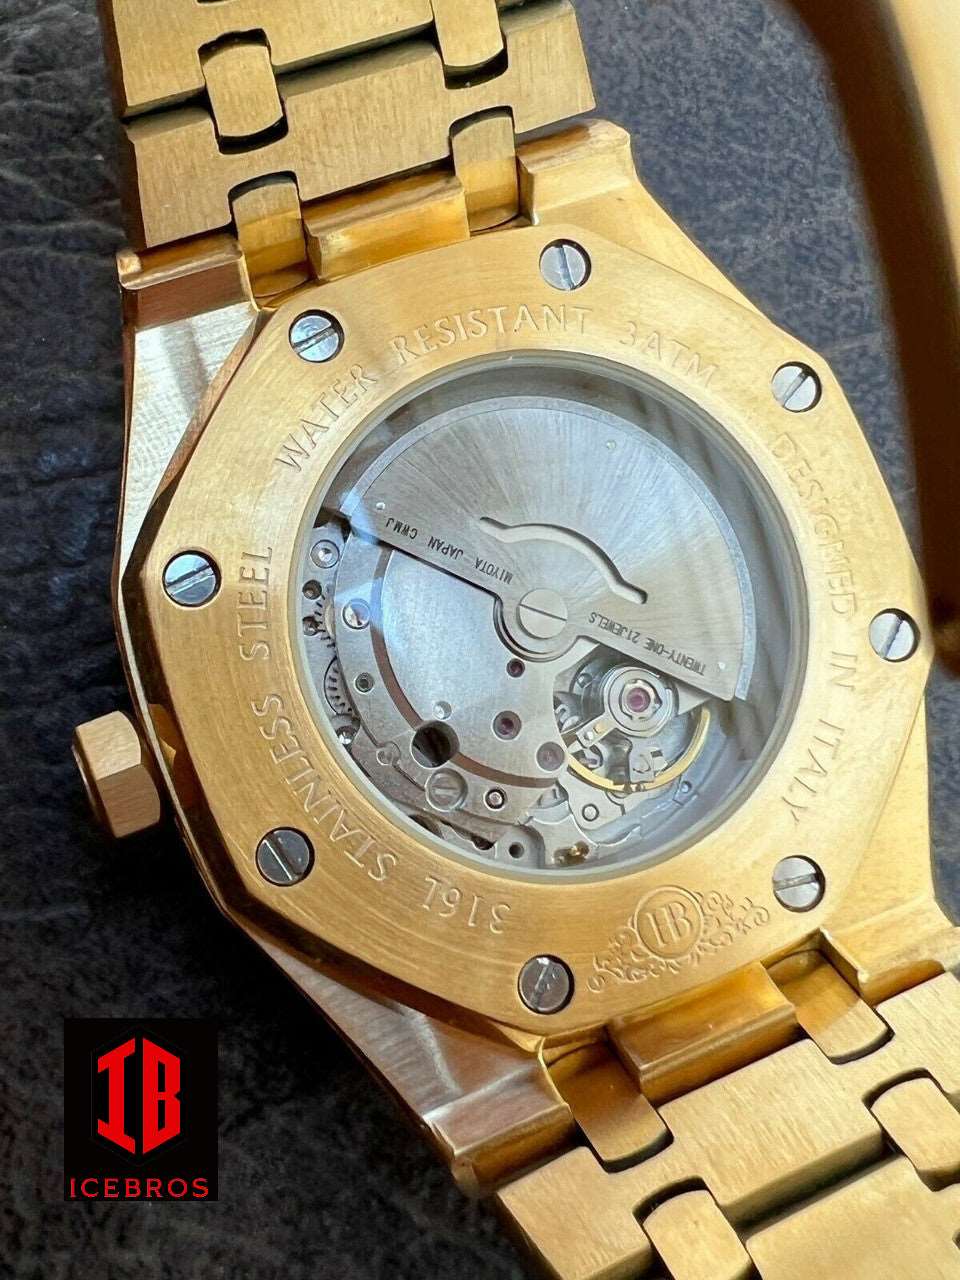 (13) MOISSANITE Watch Iced Automatic Skeleton 14K GP 44mm HipHop Passes Diamond Test (13.5CT)